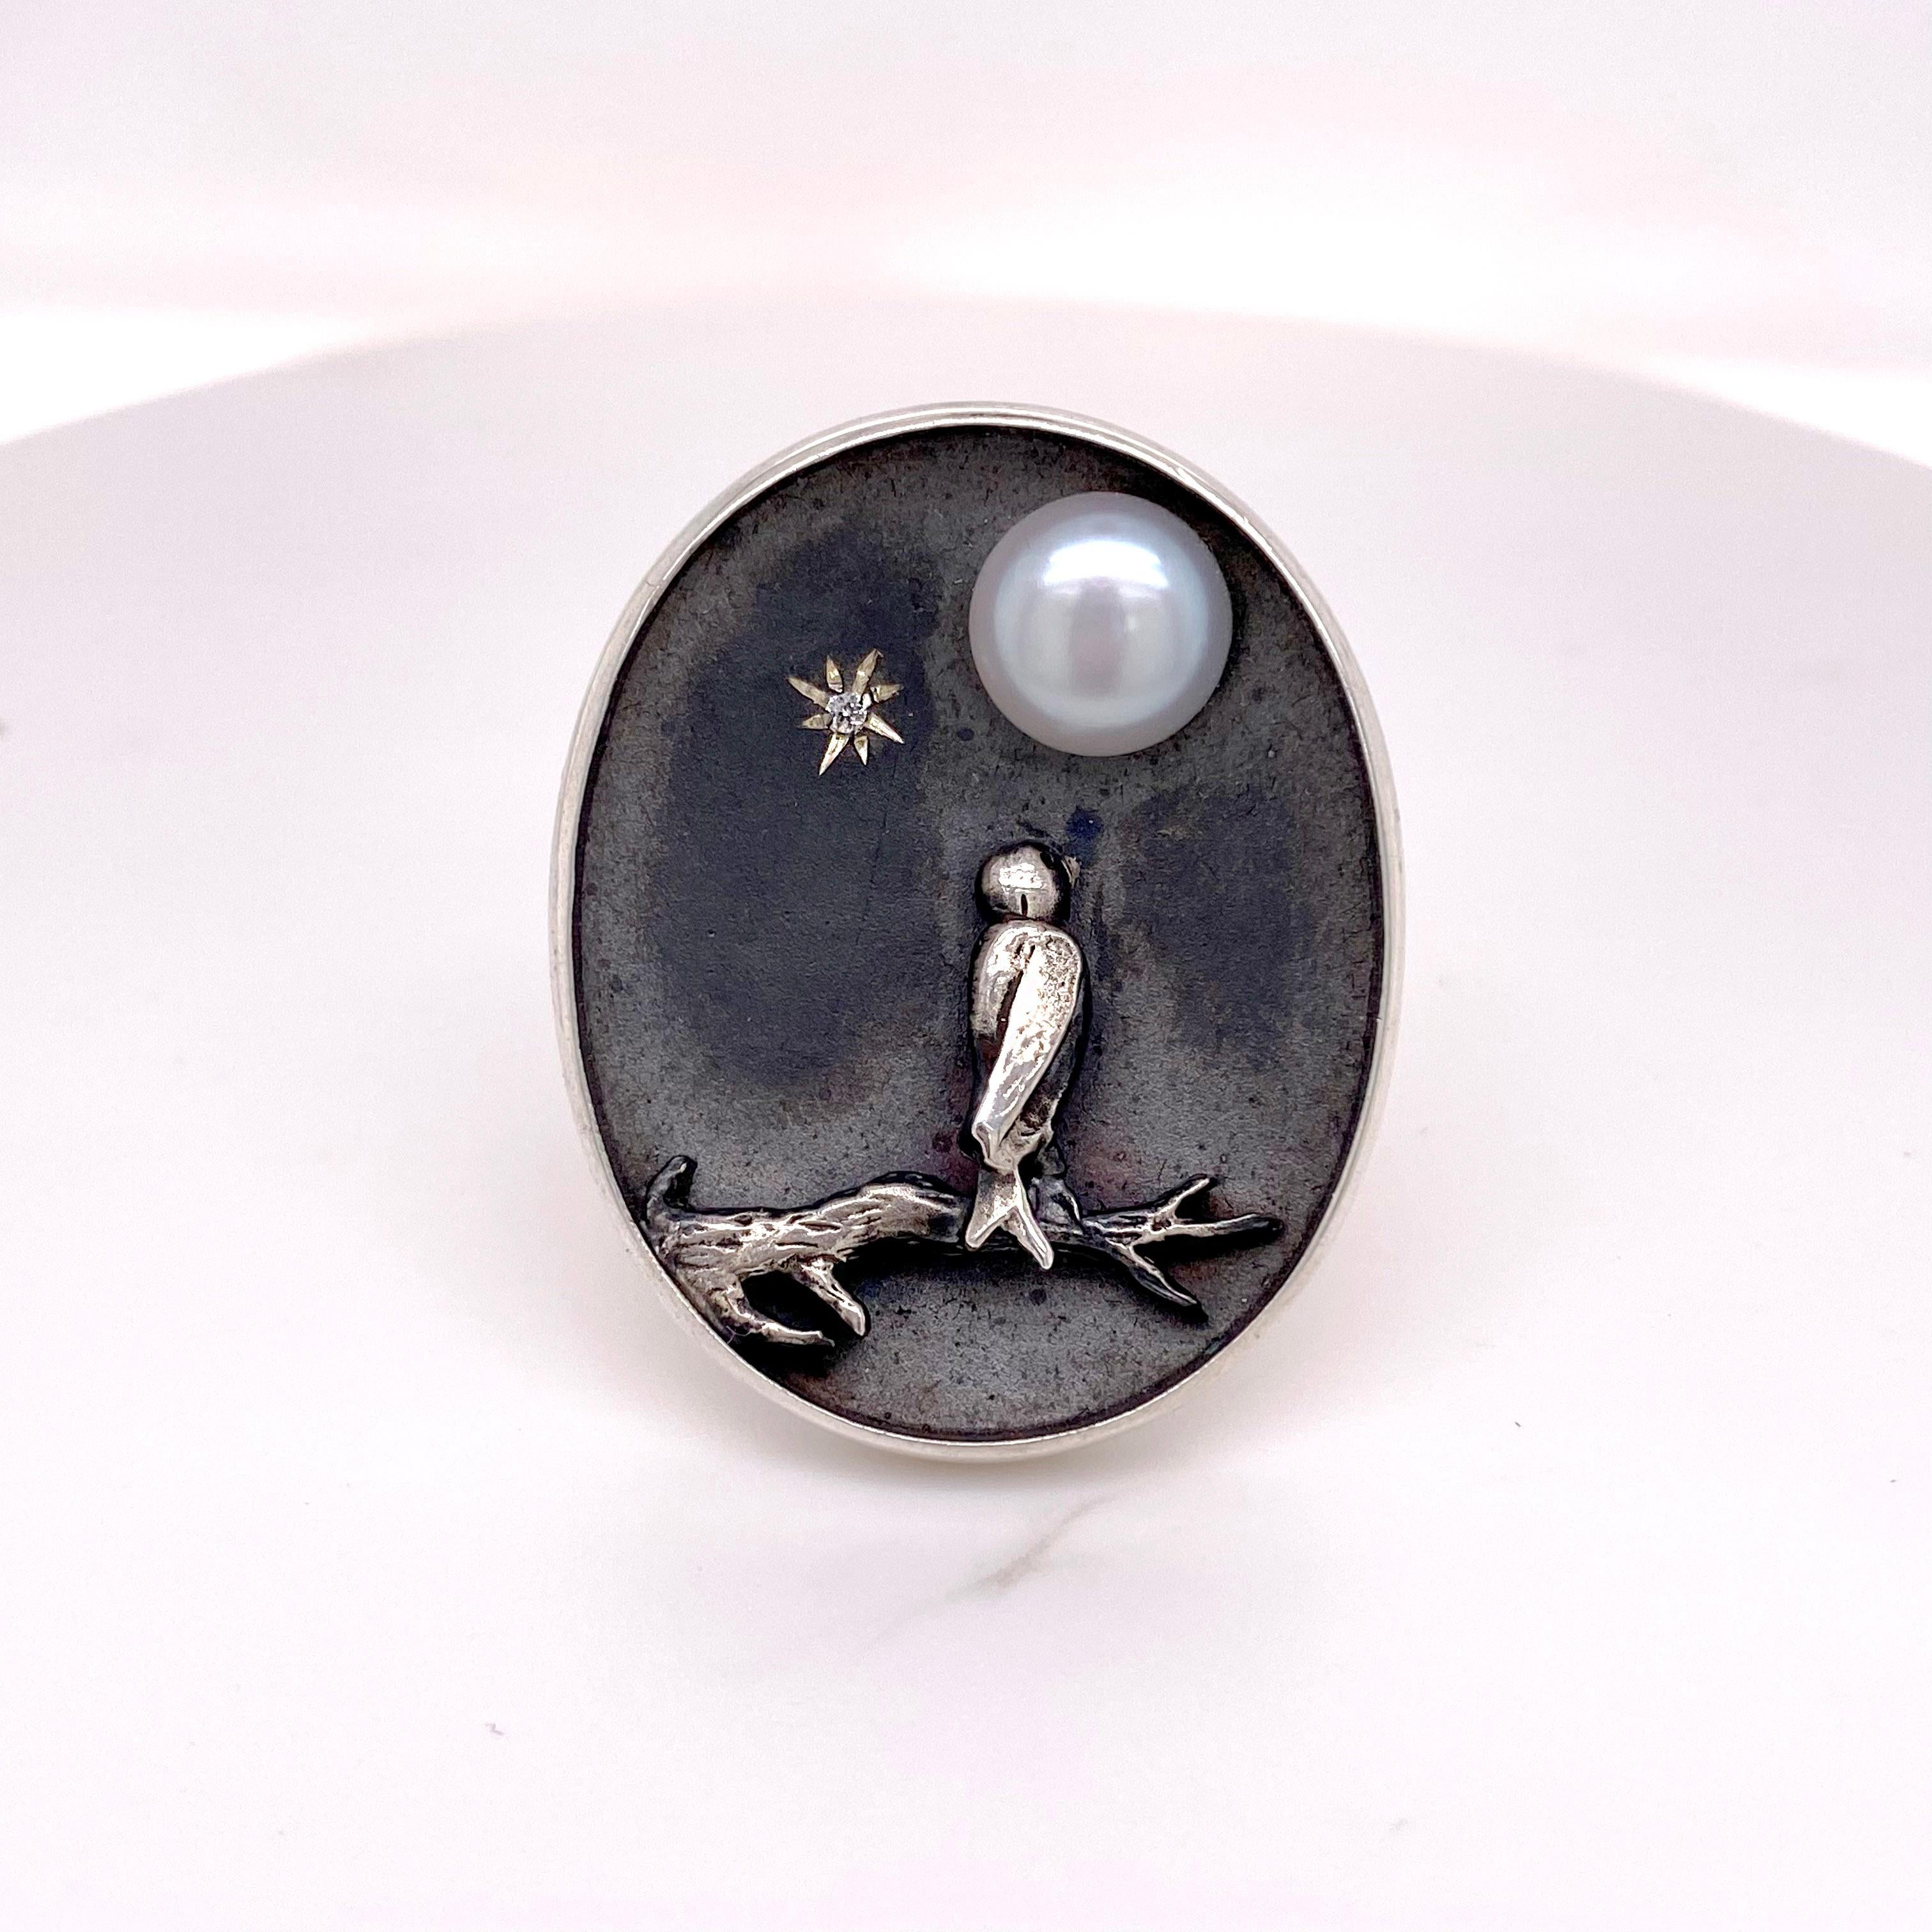 Round Cut Moonlight Ring w Bird on Tree Branch, Art Deco Style Ring with Diamond Pearl